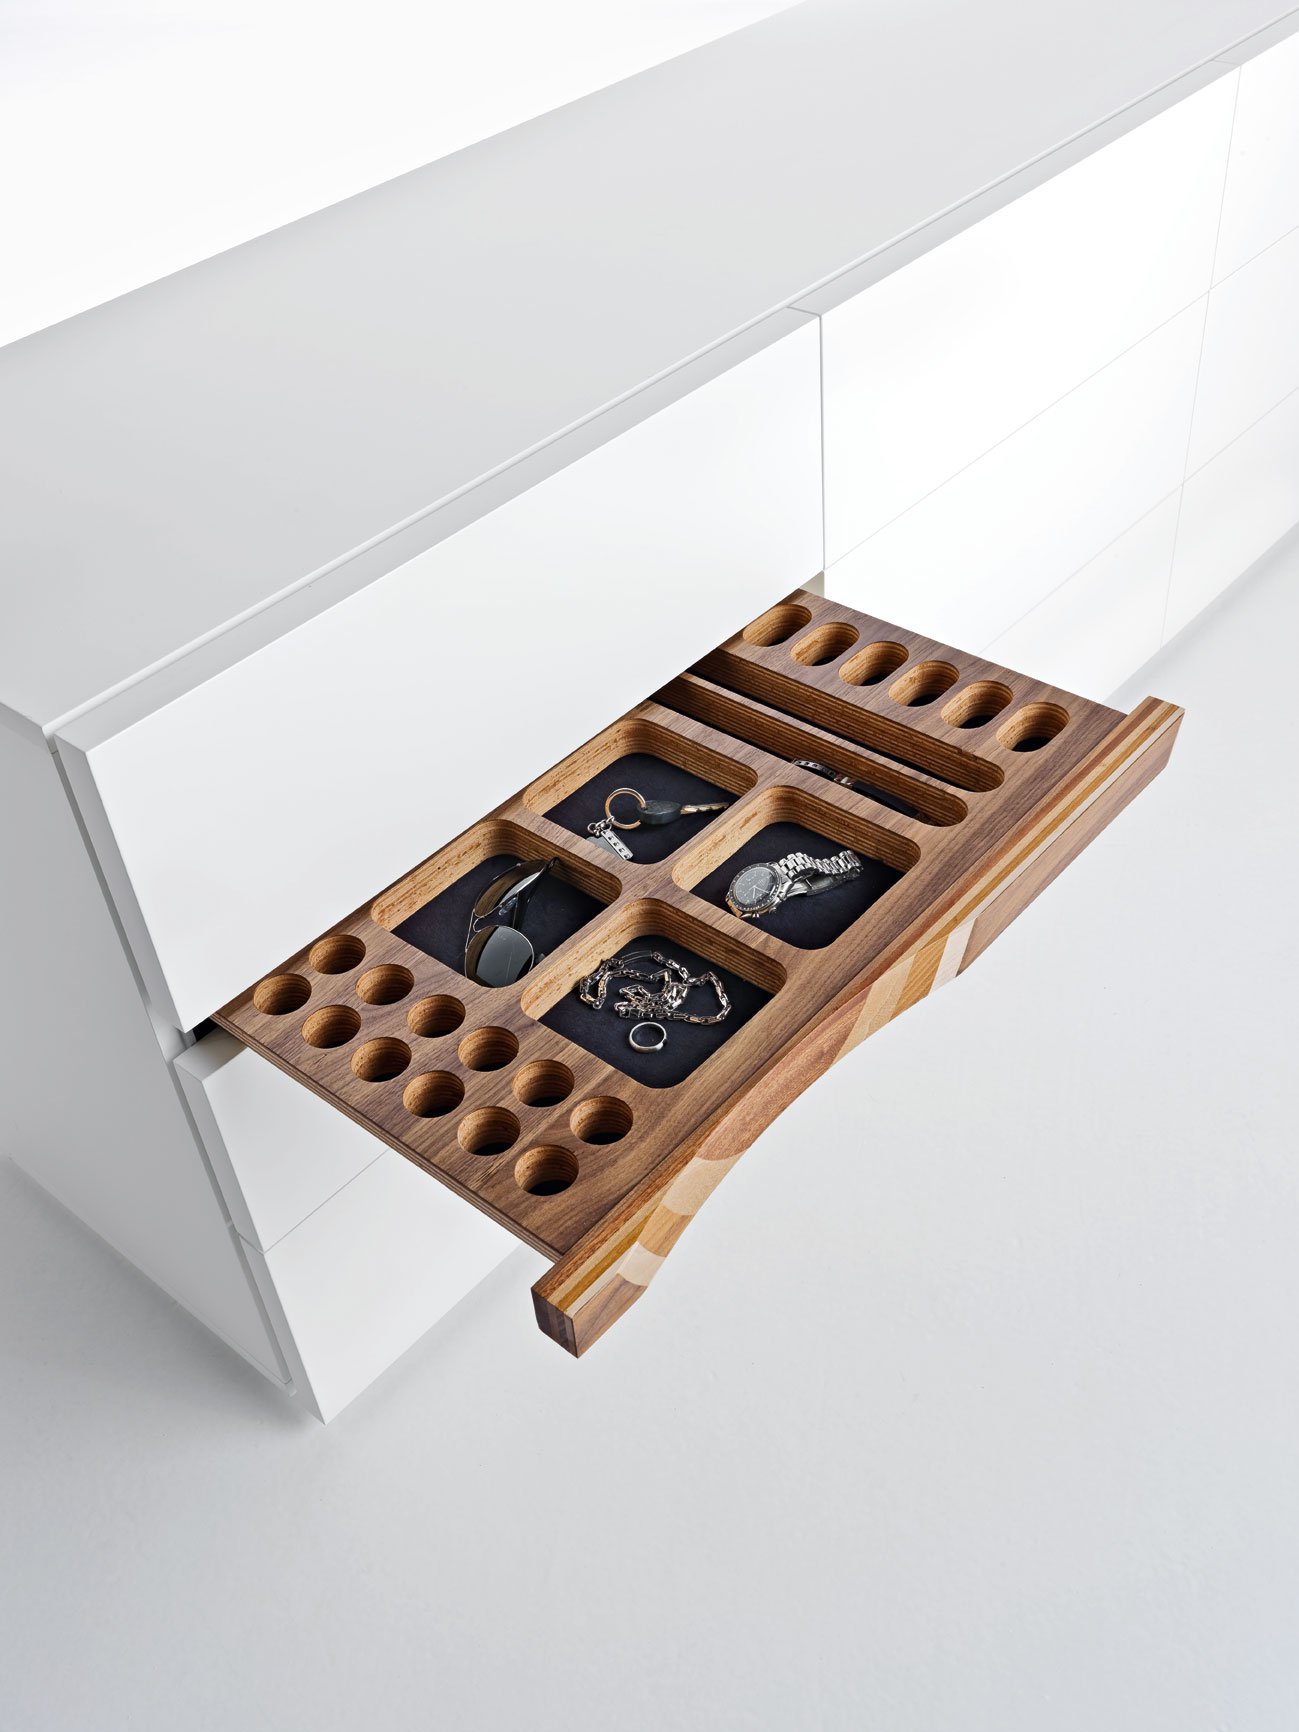 ComRi Dresser from Horm, designed by StH